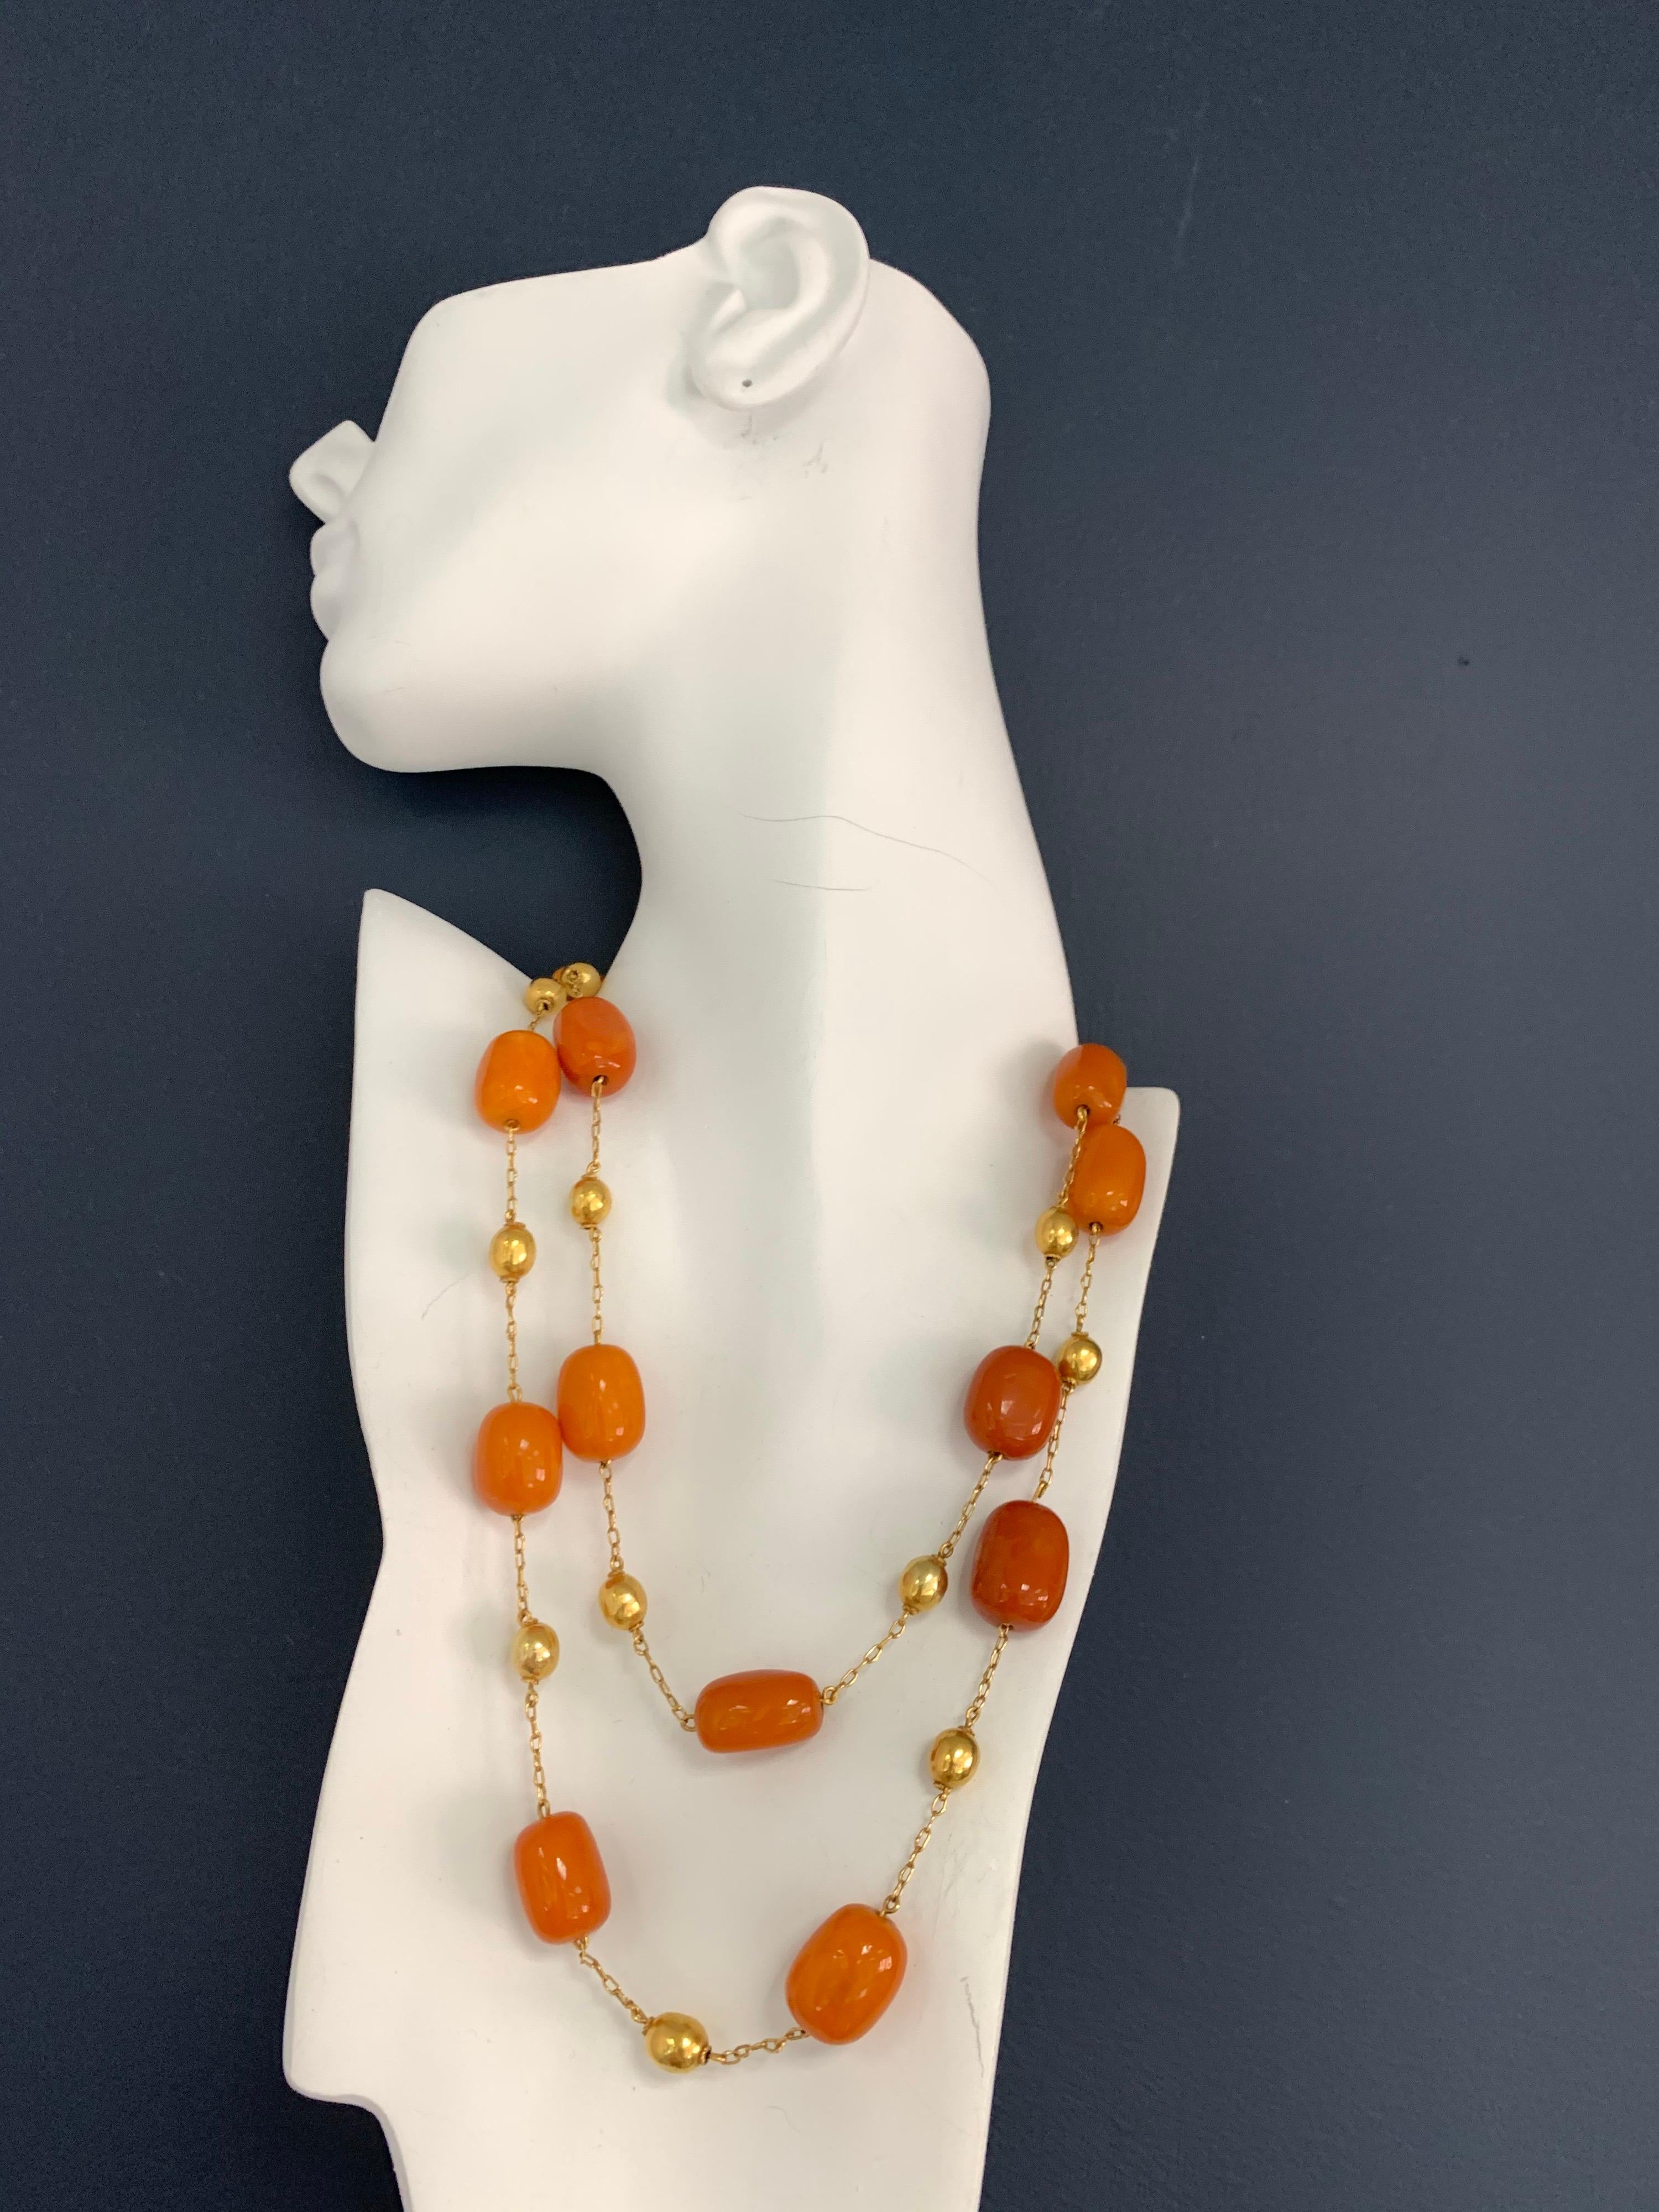 Vintage Natural Baltic Butterscotch Egg Yolk Reconstructed Amber and Gold Bead Necklace, circa 1950. 

The total weight is 73.9 grams, and each amber bead measures approximately 0.75-1